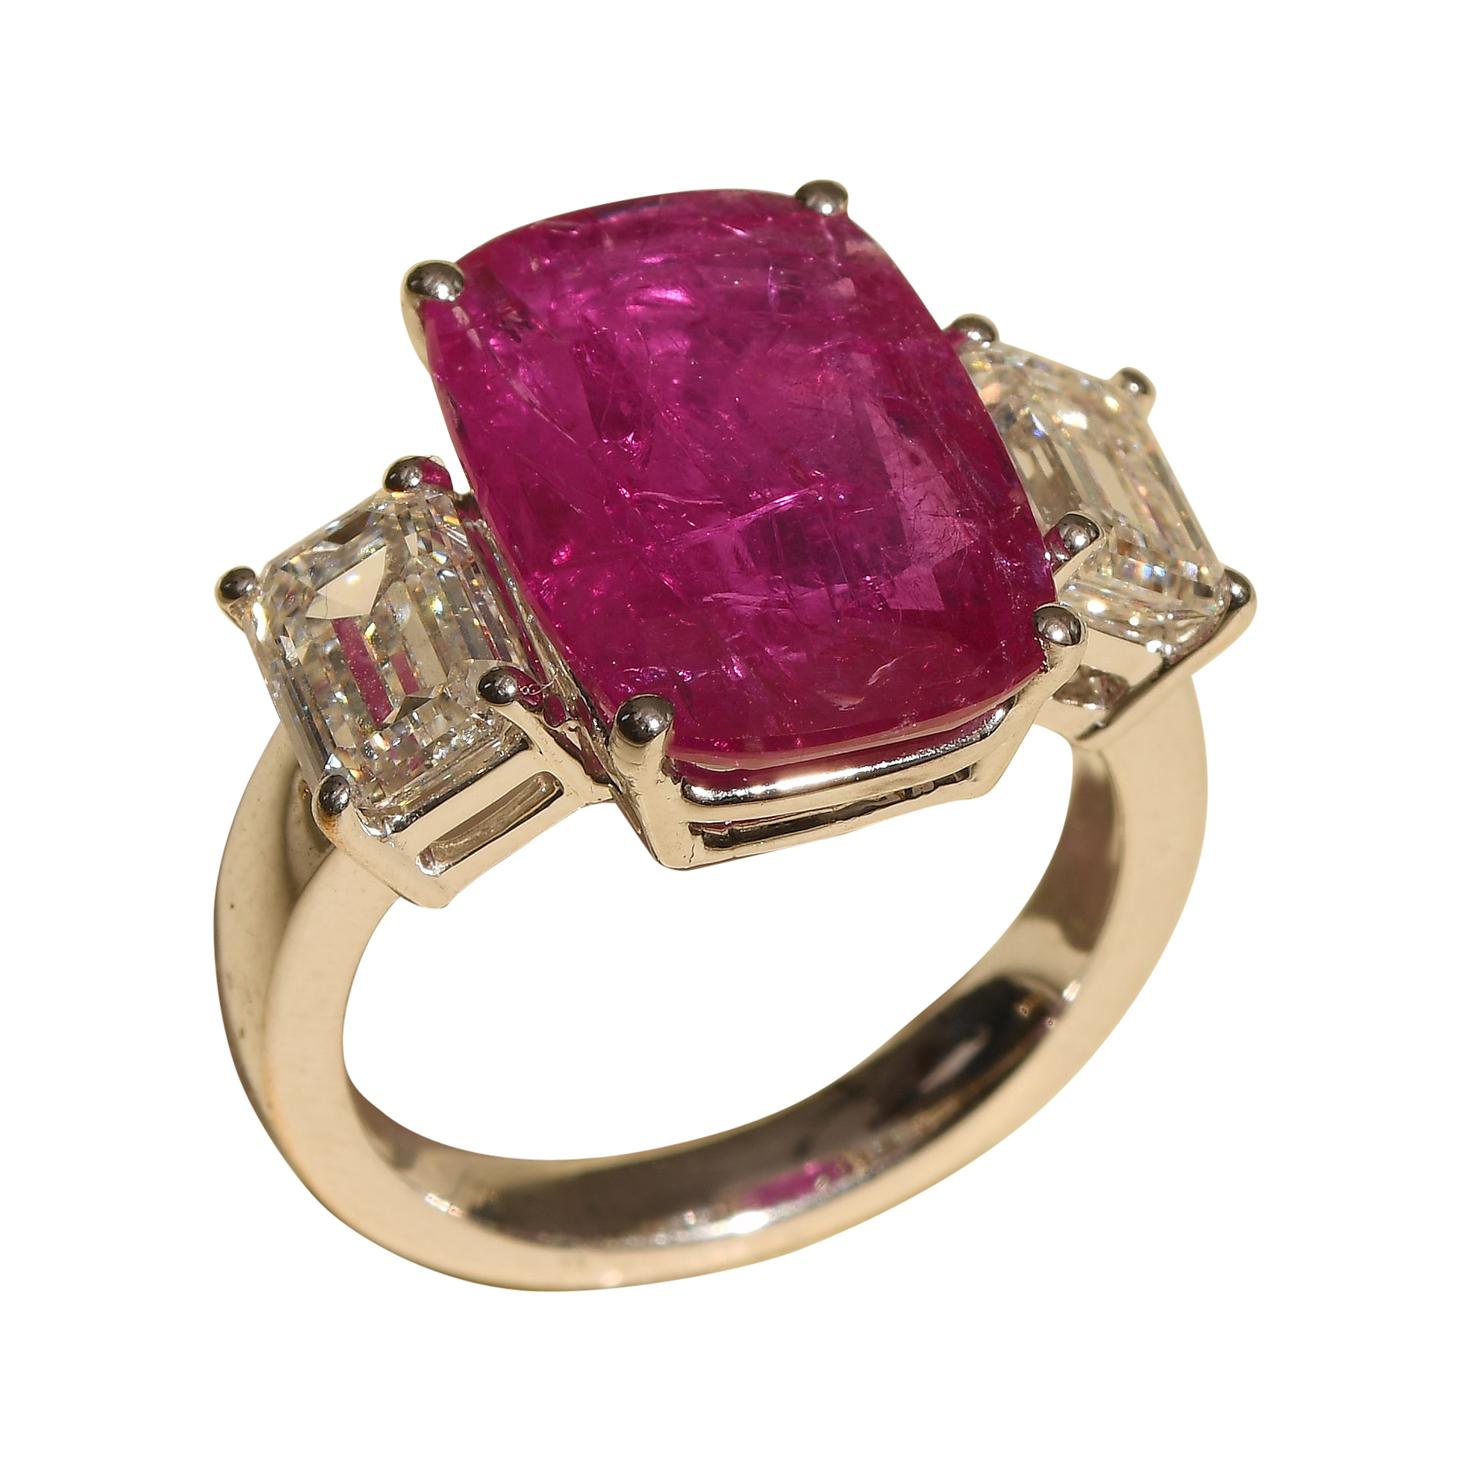 Classic 6.61 Carat Ruby Ring with 2.01 Carat Emerald Cut Diamonds For Sale